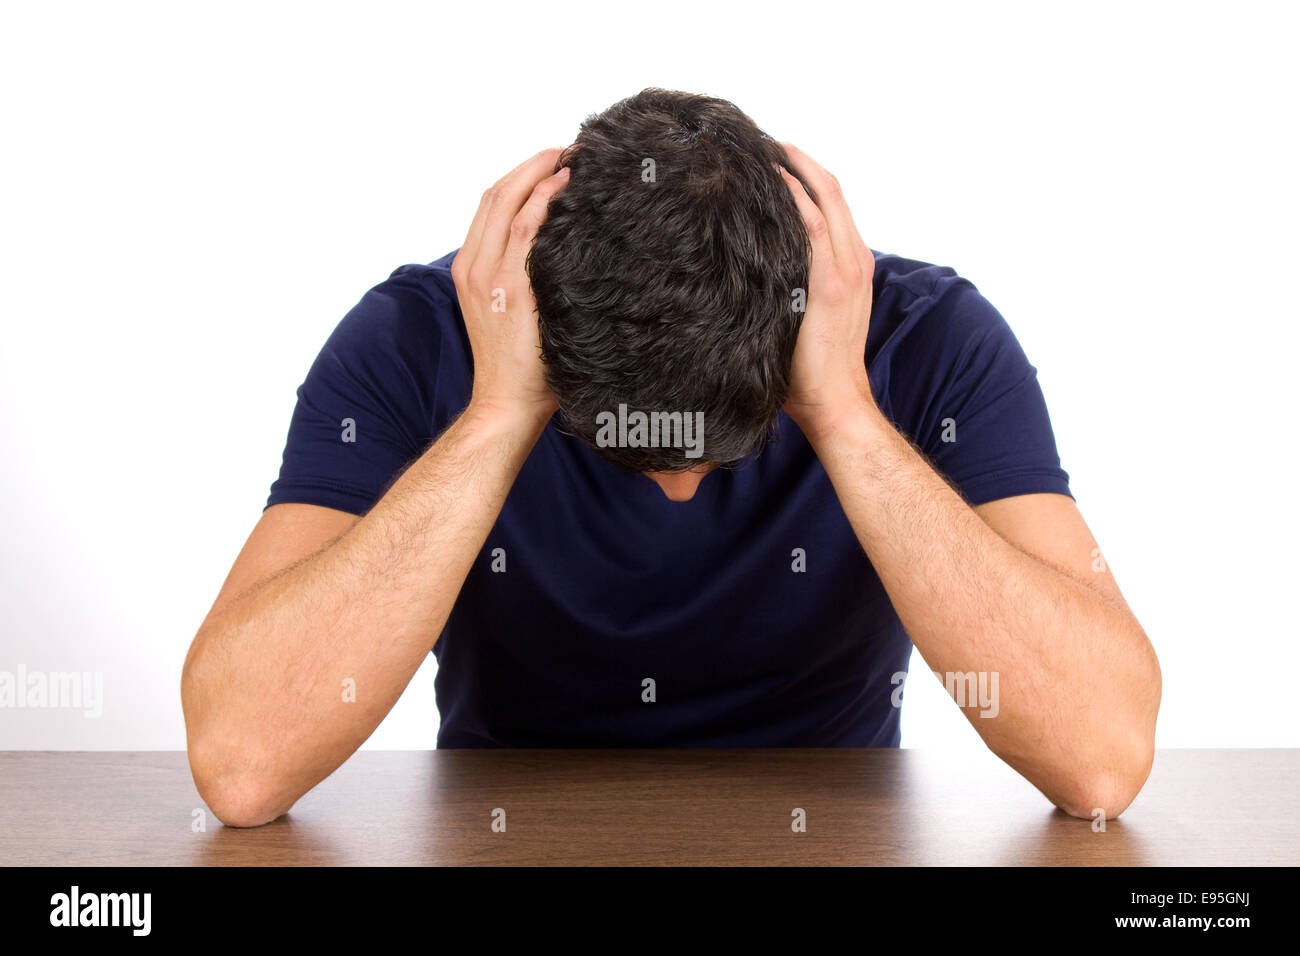 Downcast man holds his head as he suffers from depression and failure. Stock Photo